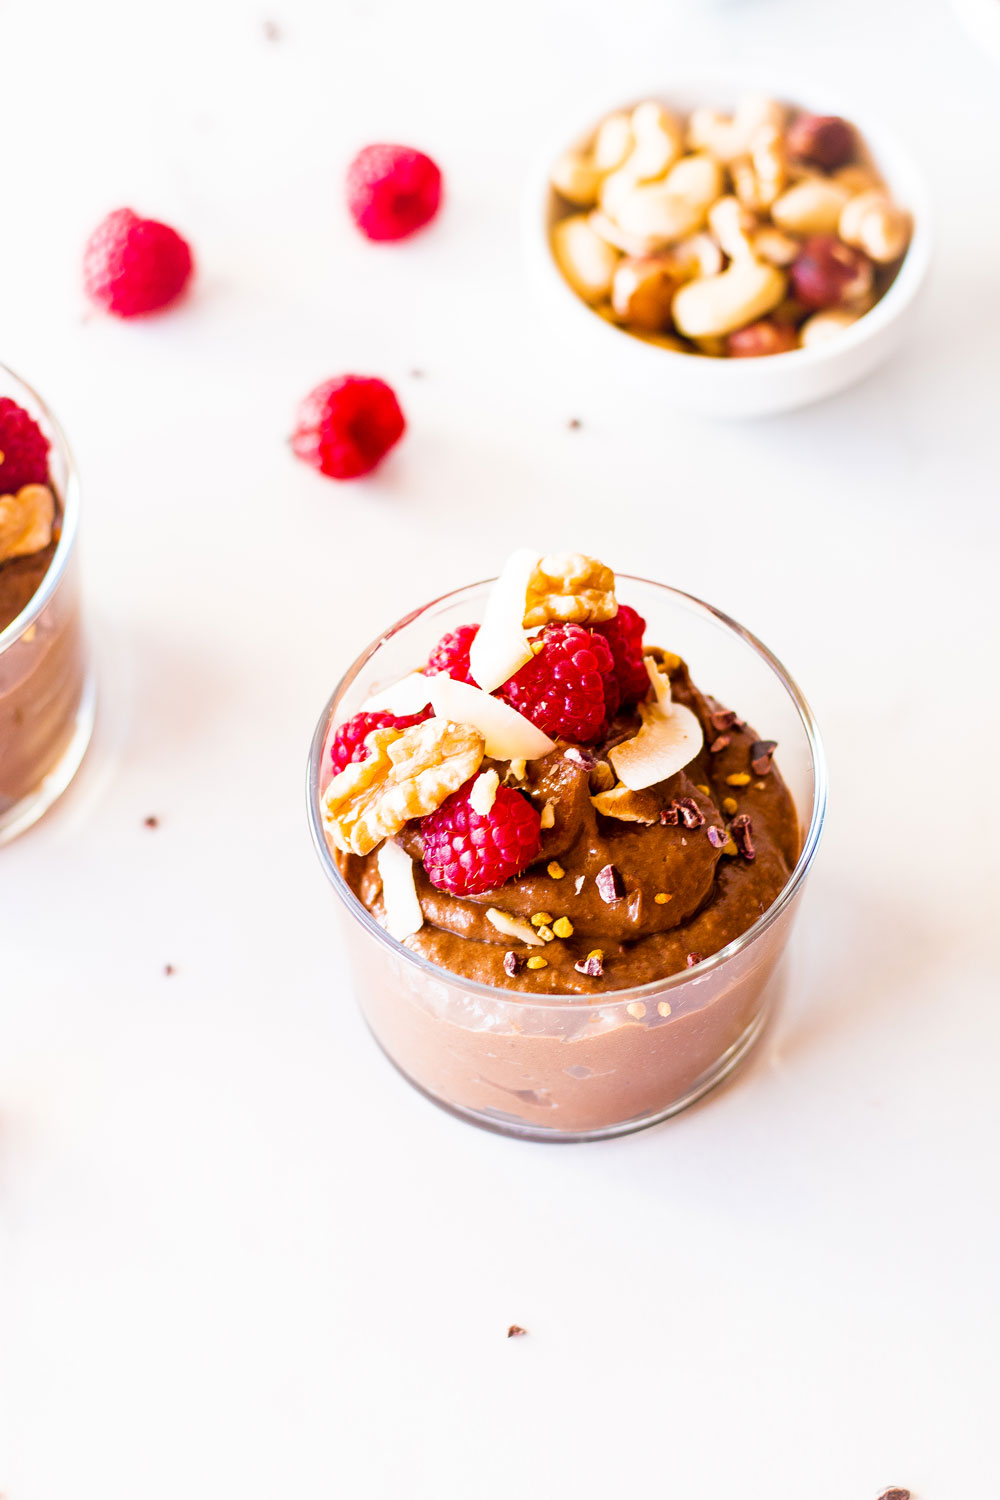 Chocolate mousse is a classic dessert but this avocado, banana, and peanut butter chocolate mousse is far from being traditional! https://www.spotebi.com/recipes/avocado-banana-peanut-butter-chocolate-mousse/